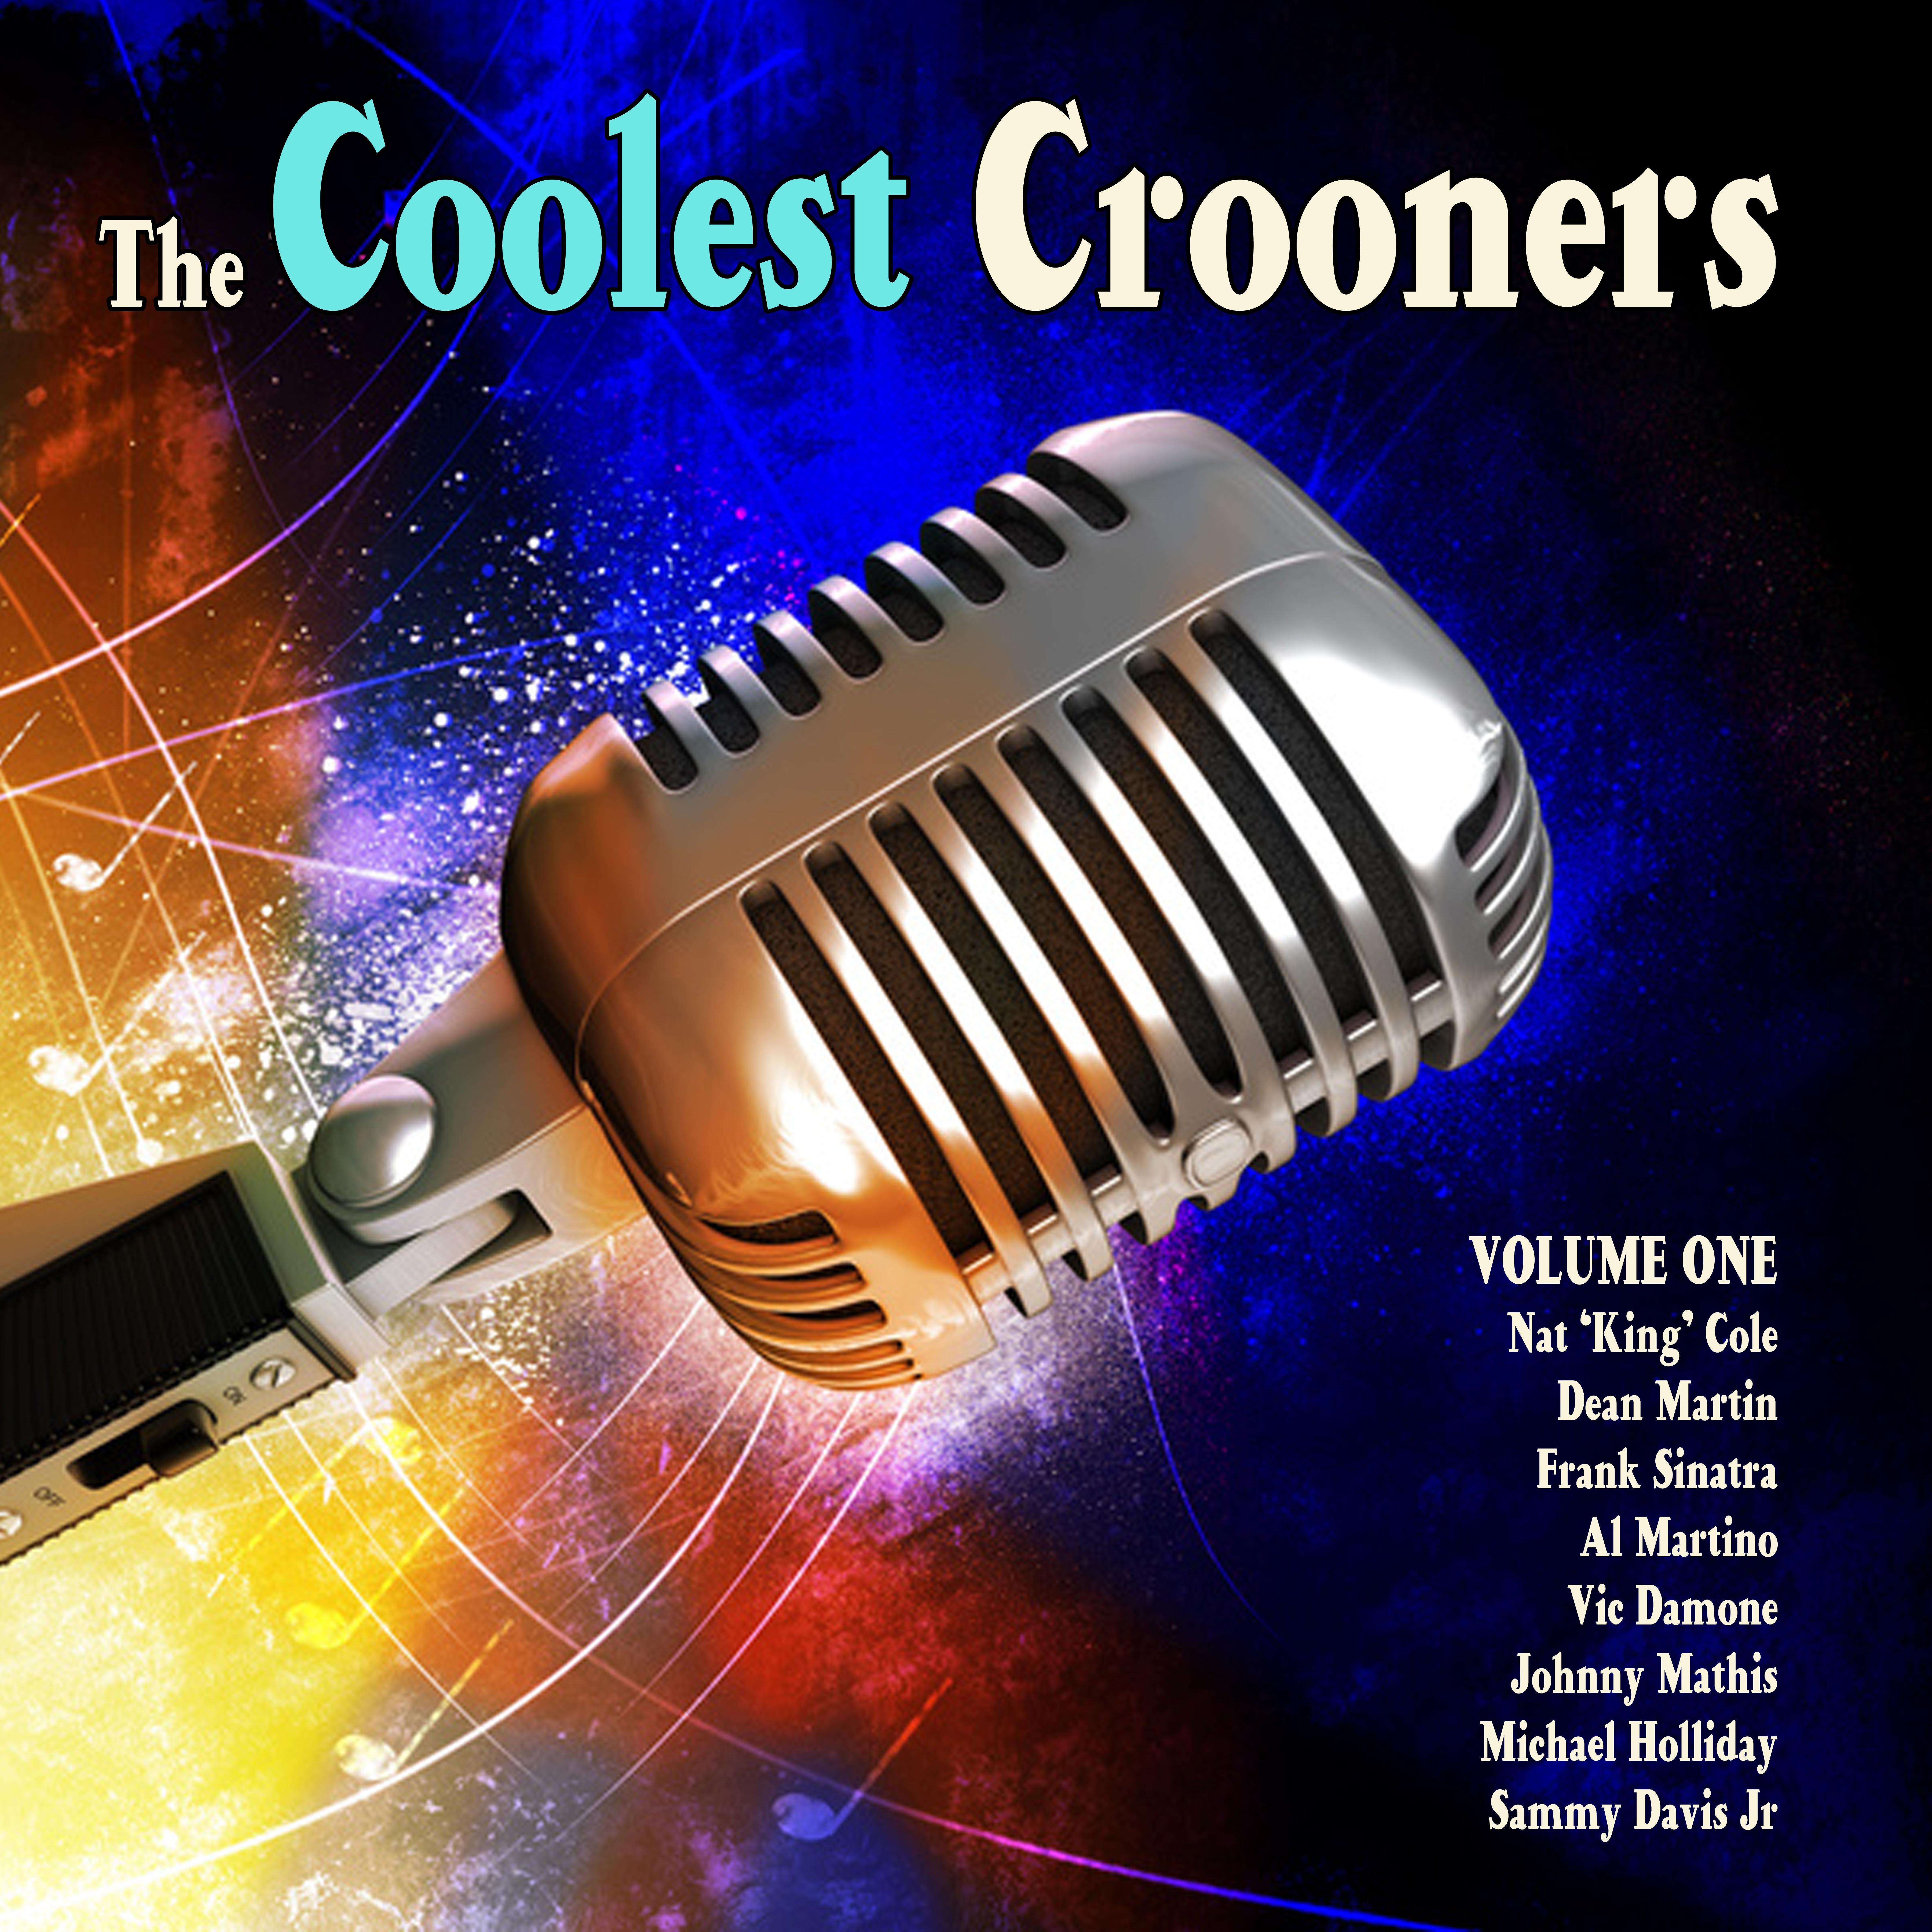 The Coolest Crooners Volume 1